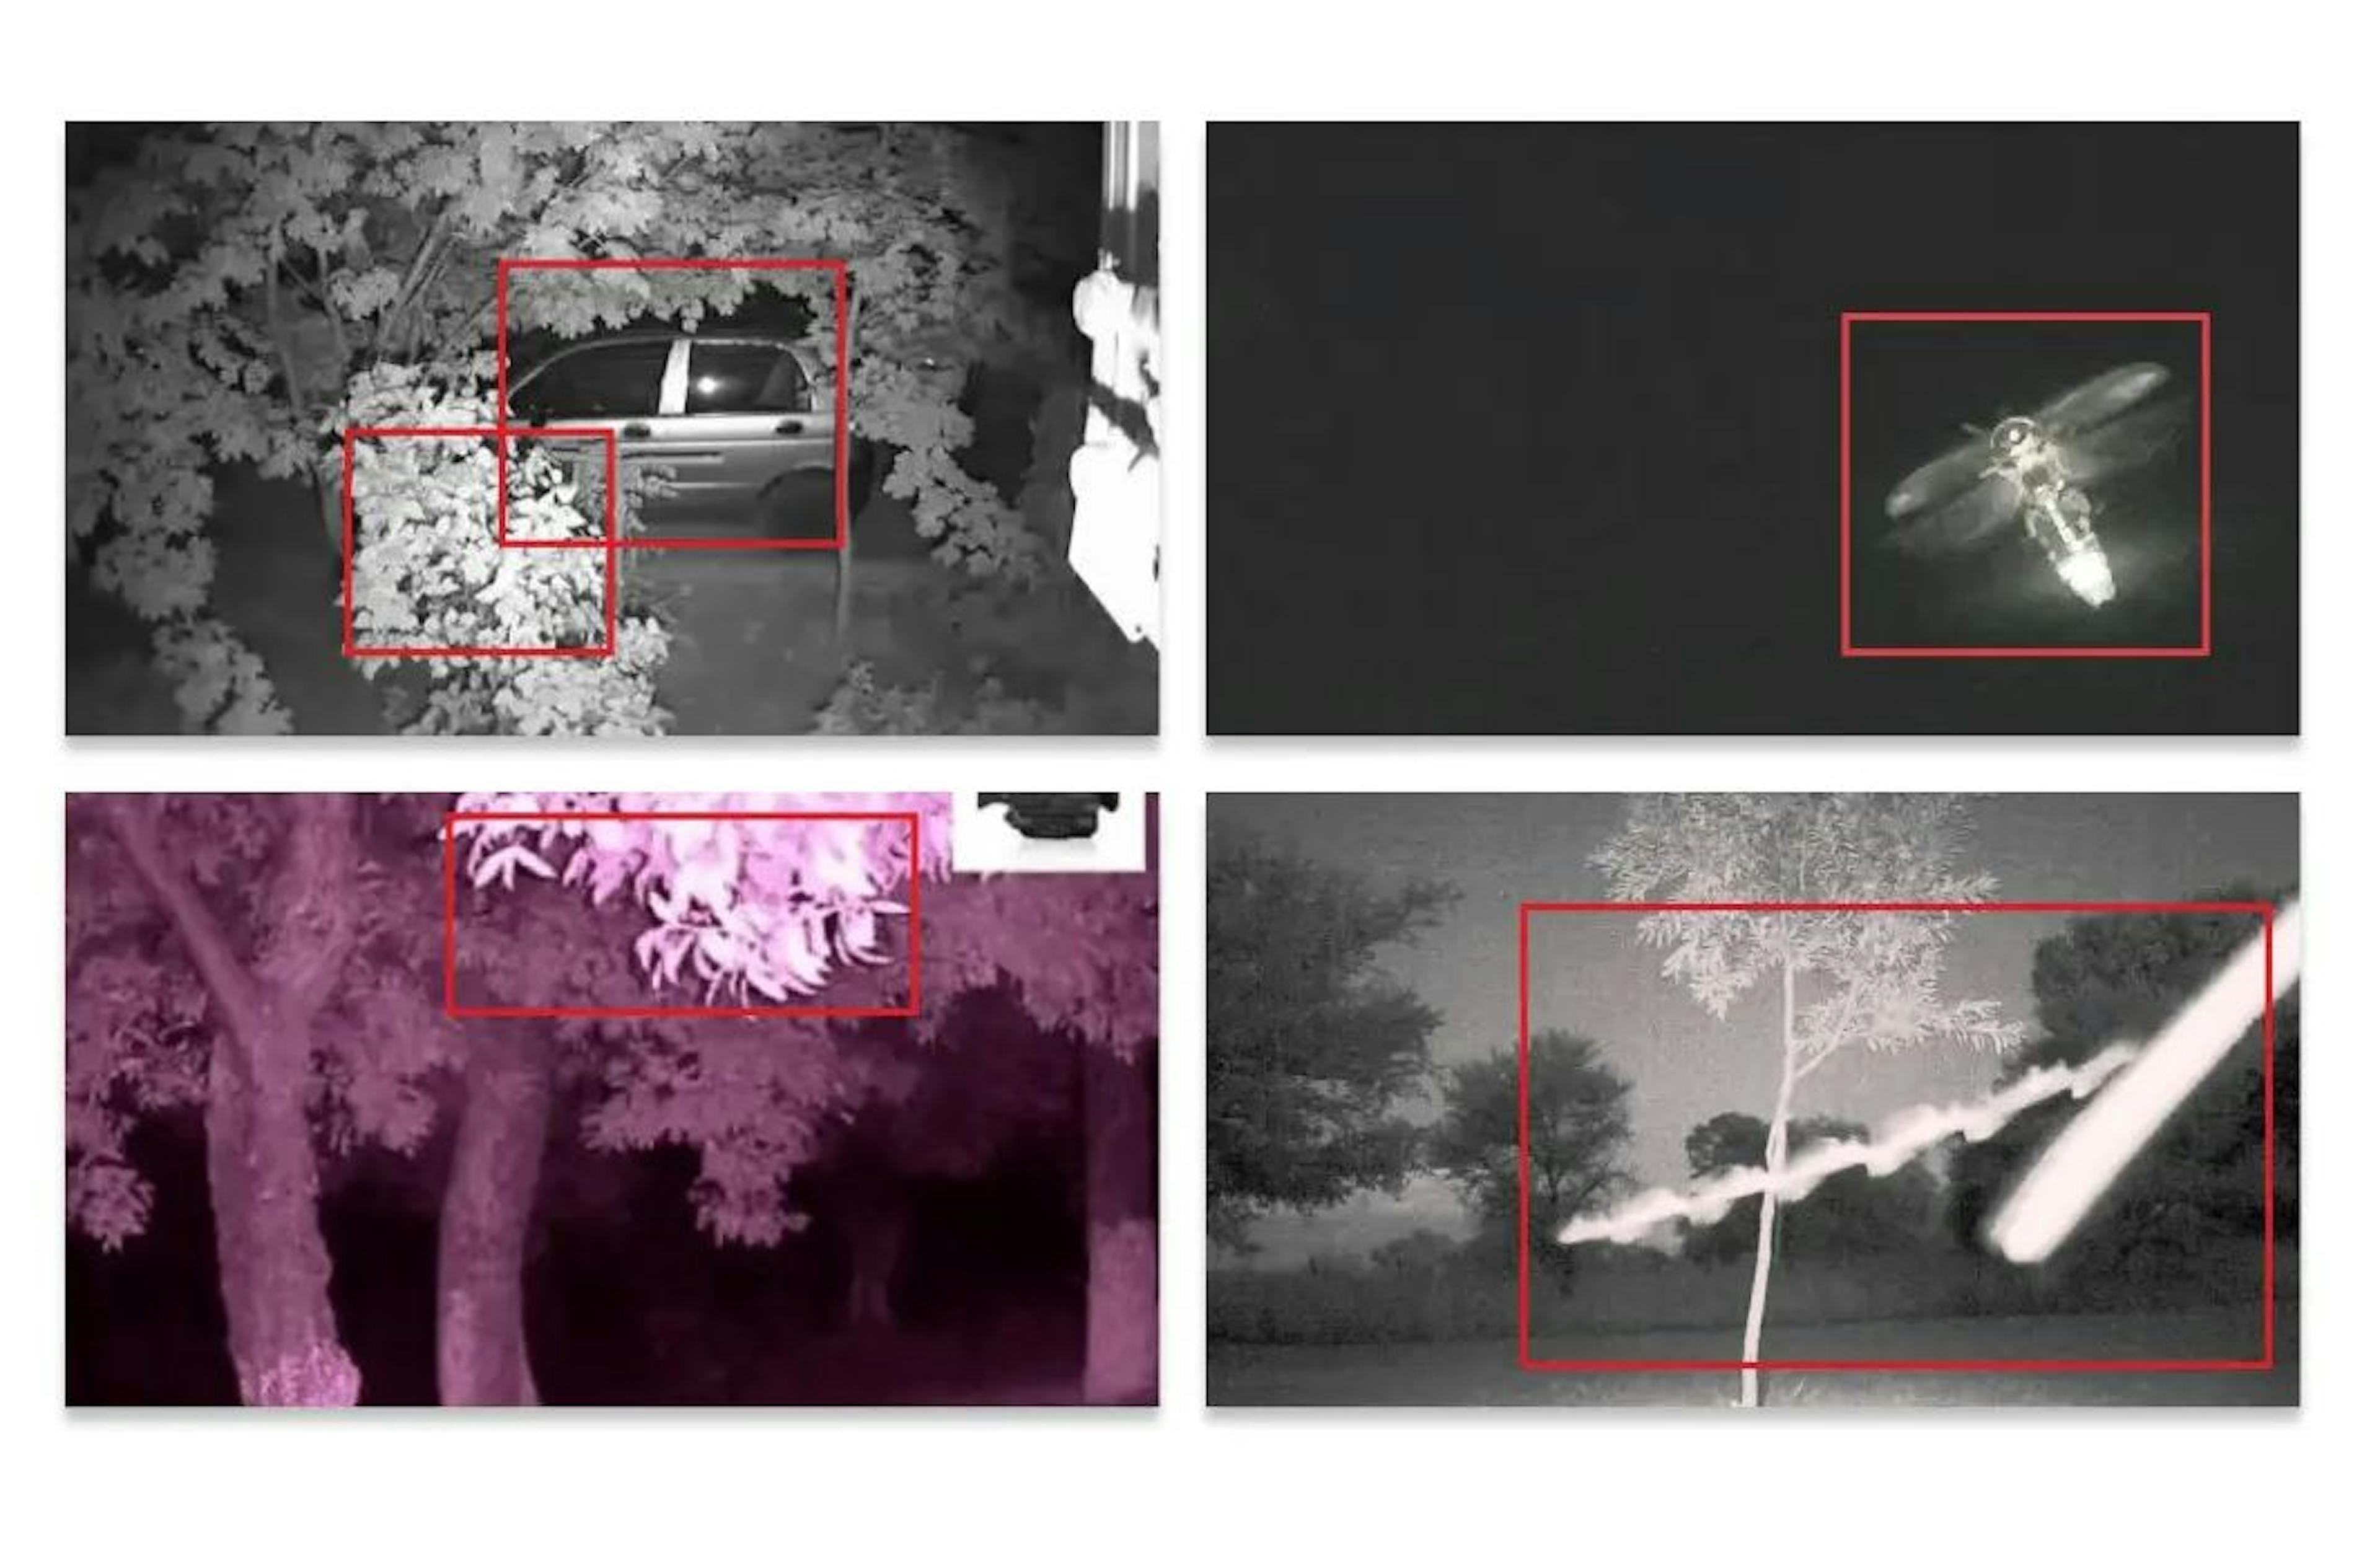 During the night, the model would detect mobing tree branches or insects as birds